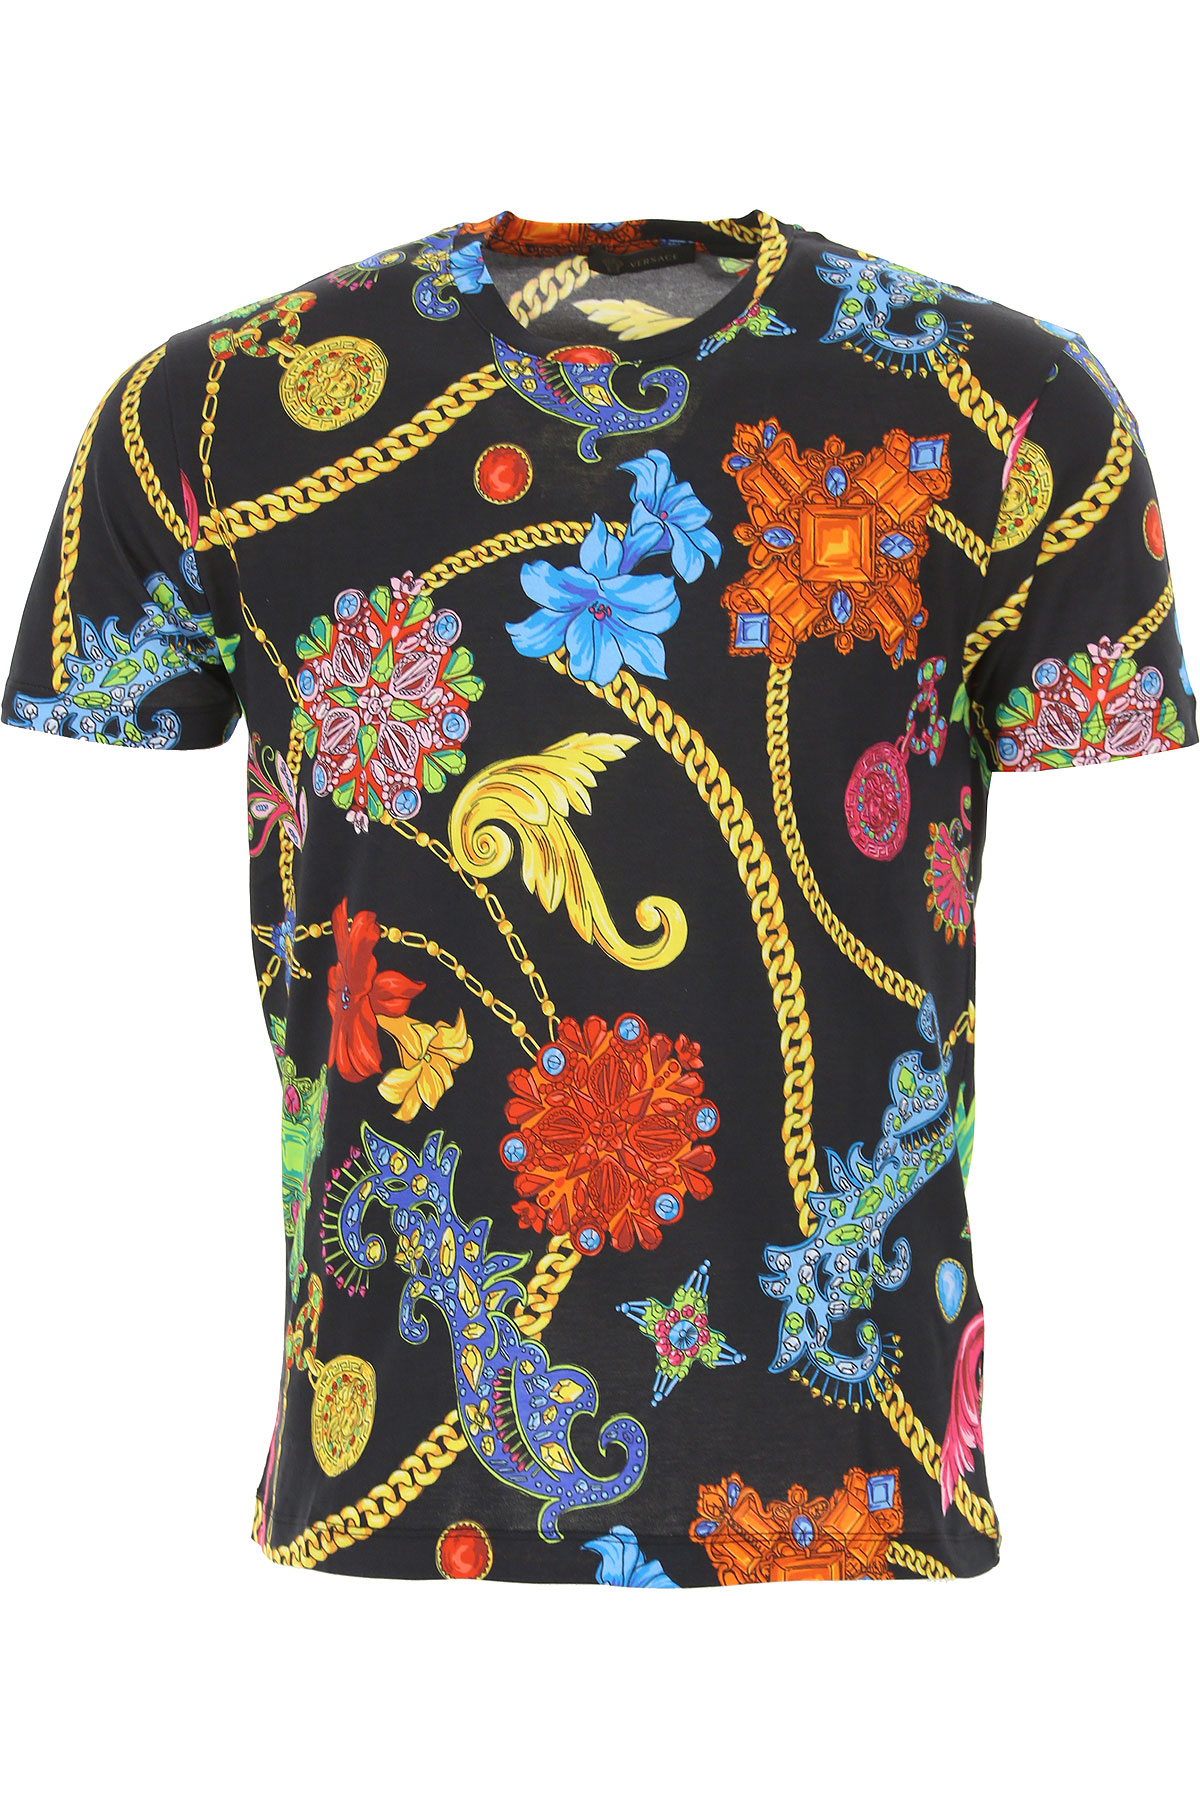 Mens Clothing Versace, Style code: a77276-a229165-a72w